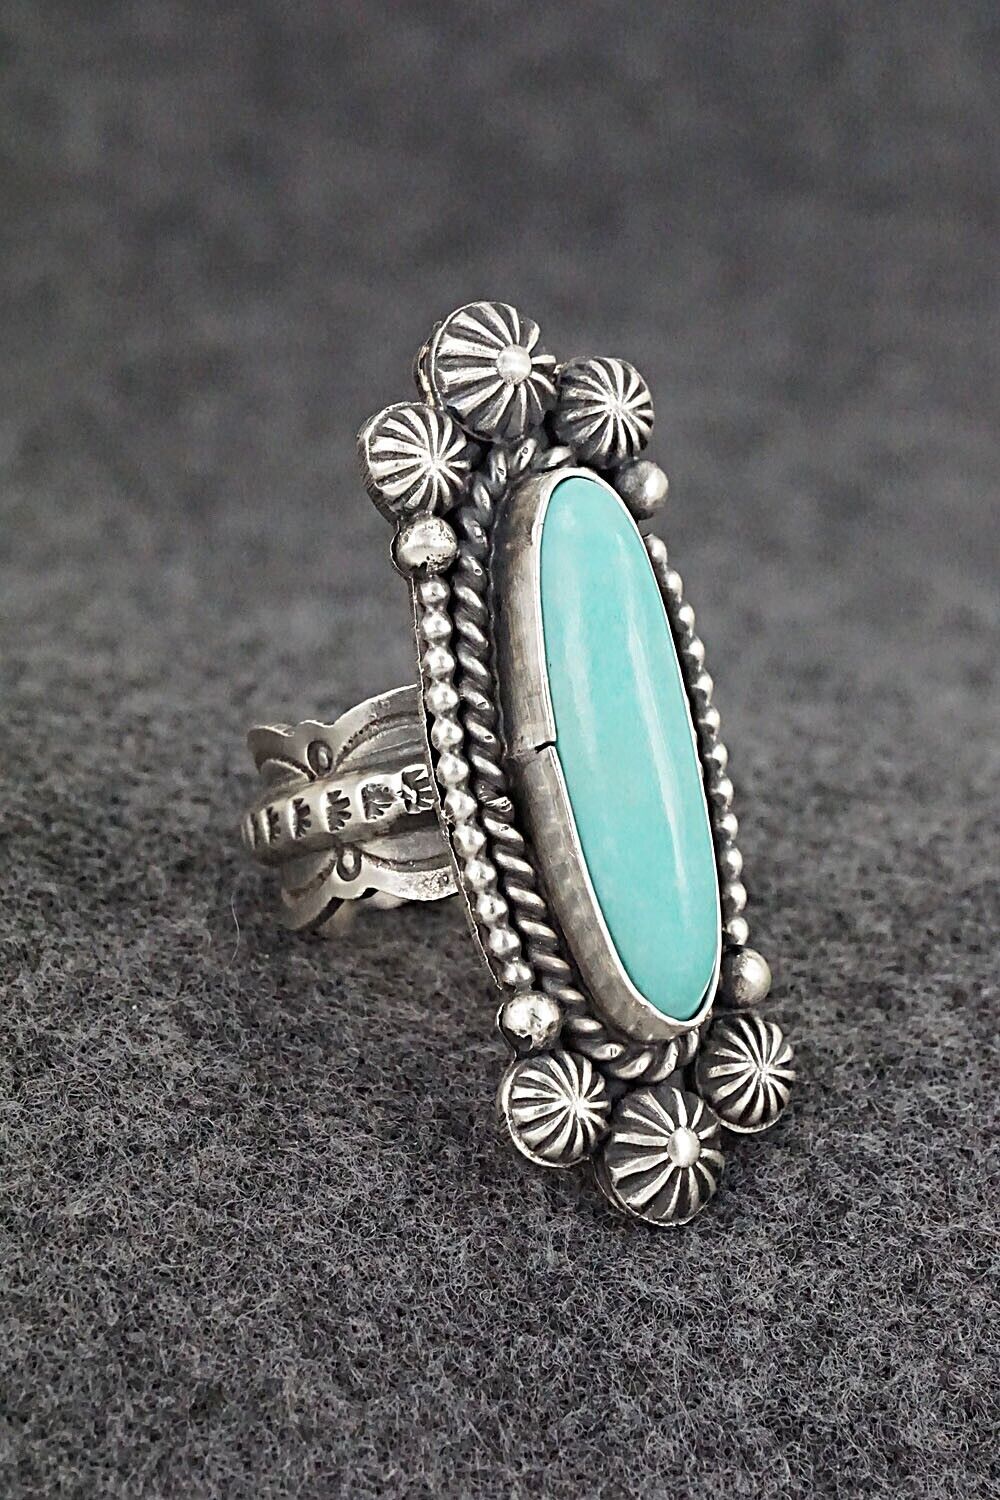 Turquoise & Sterling Silver Ring - Michael Calladitto - Size 8.5